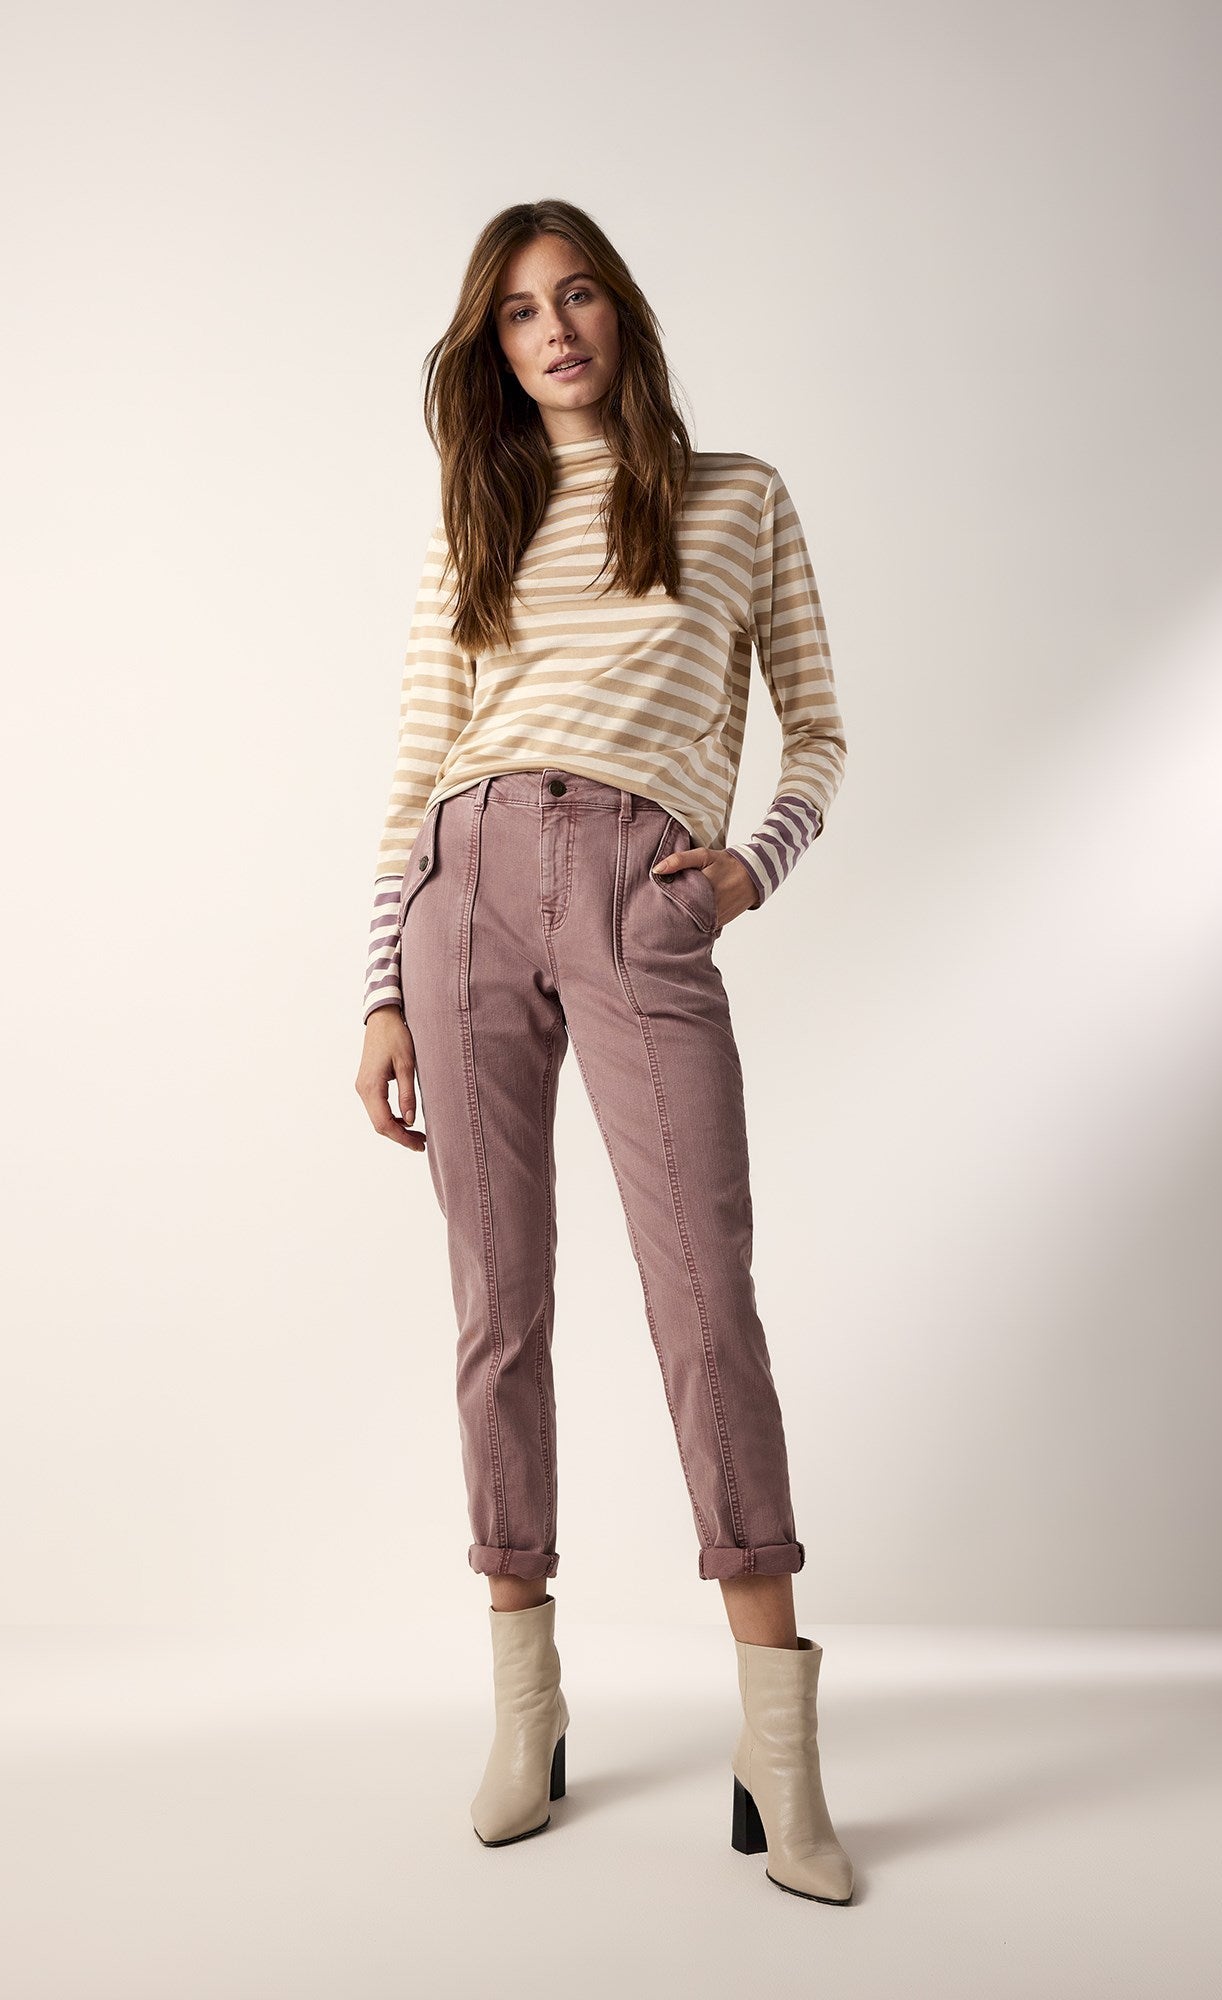 front full body view of the summum striped tone-on-tone shirt. This top has neutral brown stripes with contrasting wine stripes on the end of the long sleeves. The top also has a slight funnel neck.